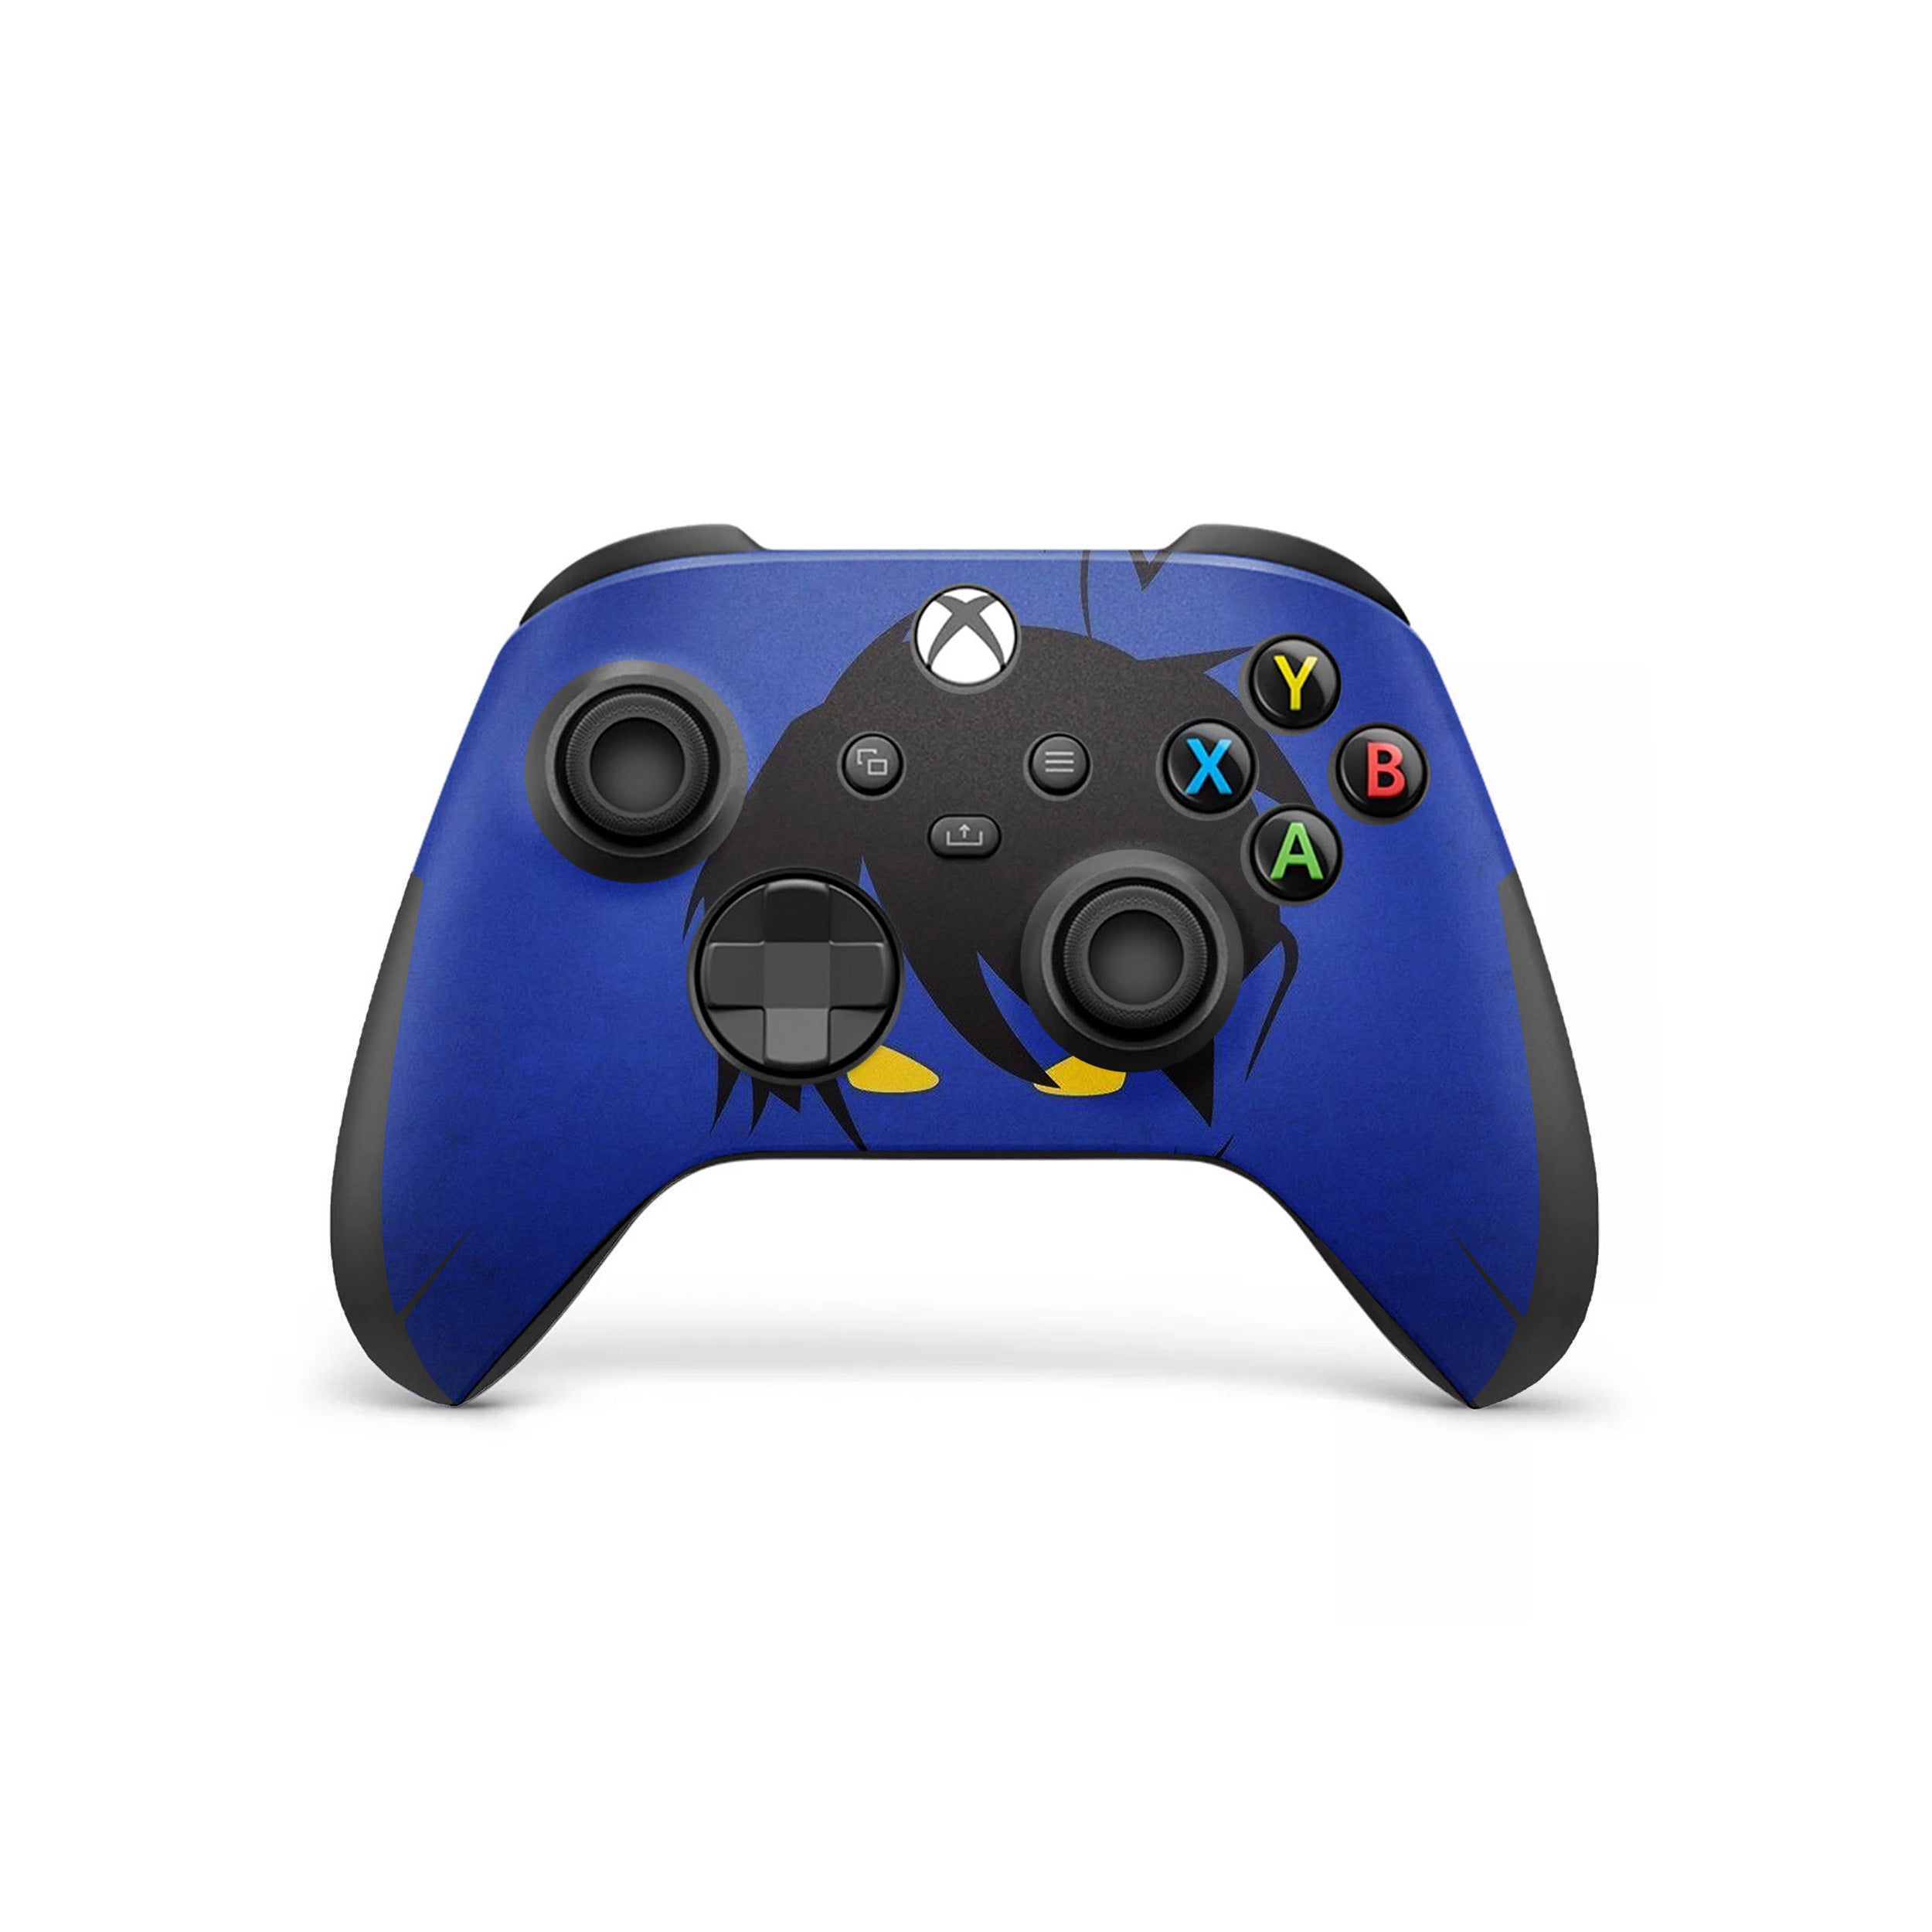 A video game skin featuring a Marvel X Men Nightcrawler design for the Xbox Wireless Controller.